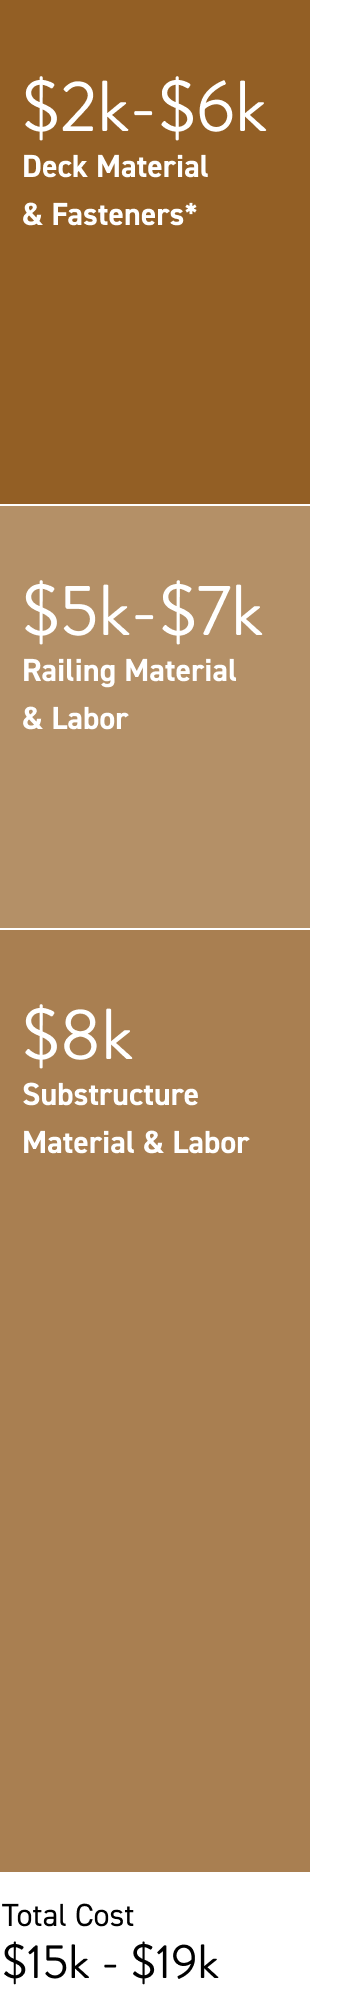 Bar chart of average deck cost with rail: "$2k-$6k | Deck Material & Fasteners*,
$5k-$7k | Railing material & labor,  $8k | Substructure Material & Labor, Total Cost: $15k-$19k"